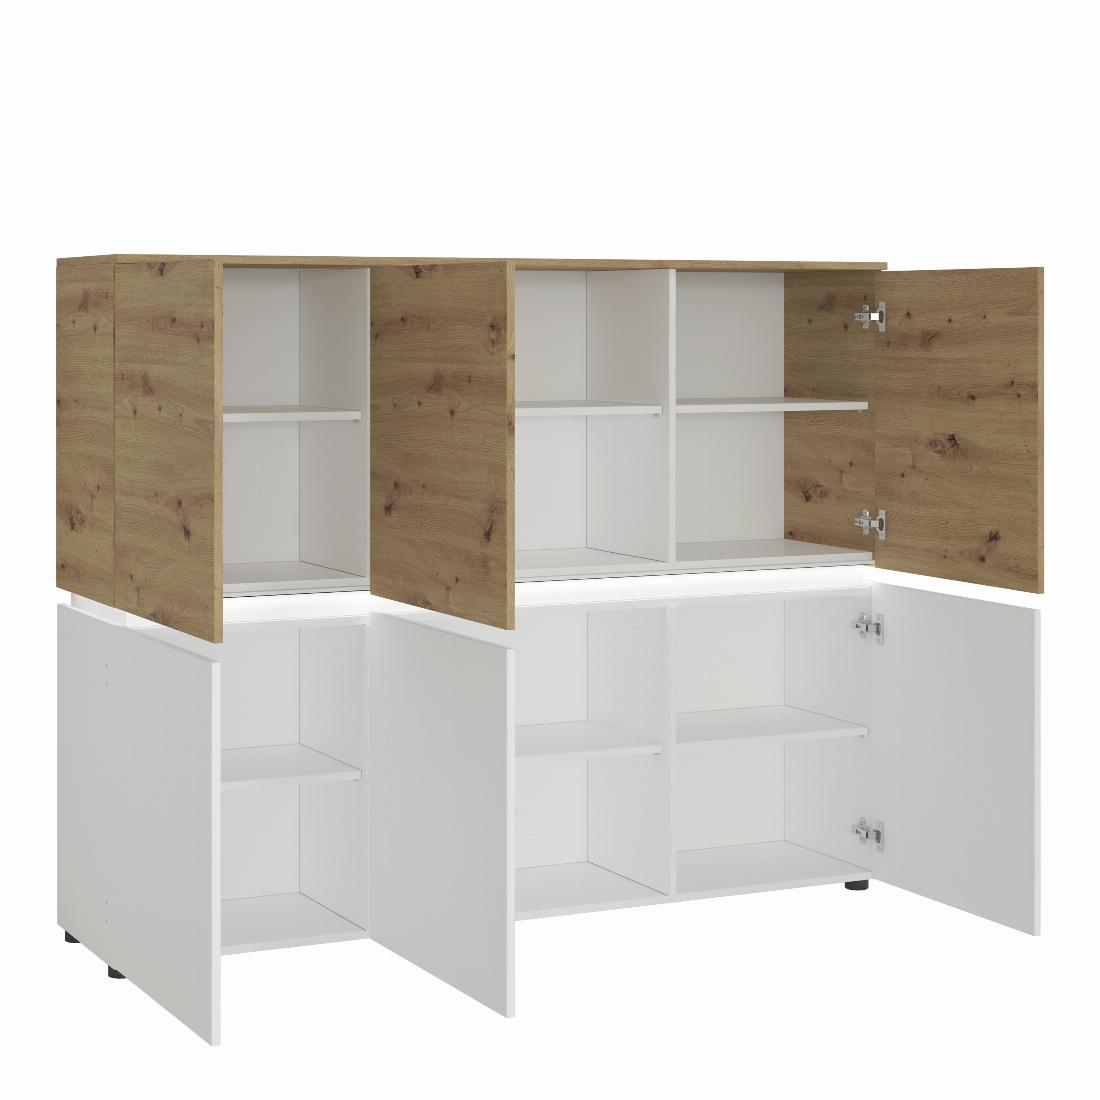 Luci 6 door cabinet (including LED lighting) in White and Oak